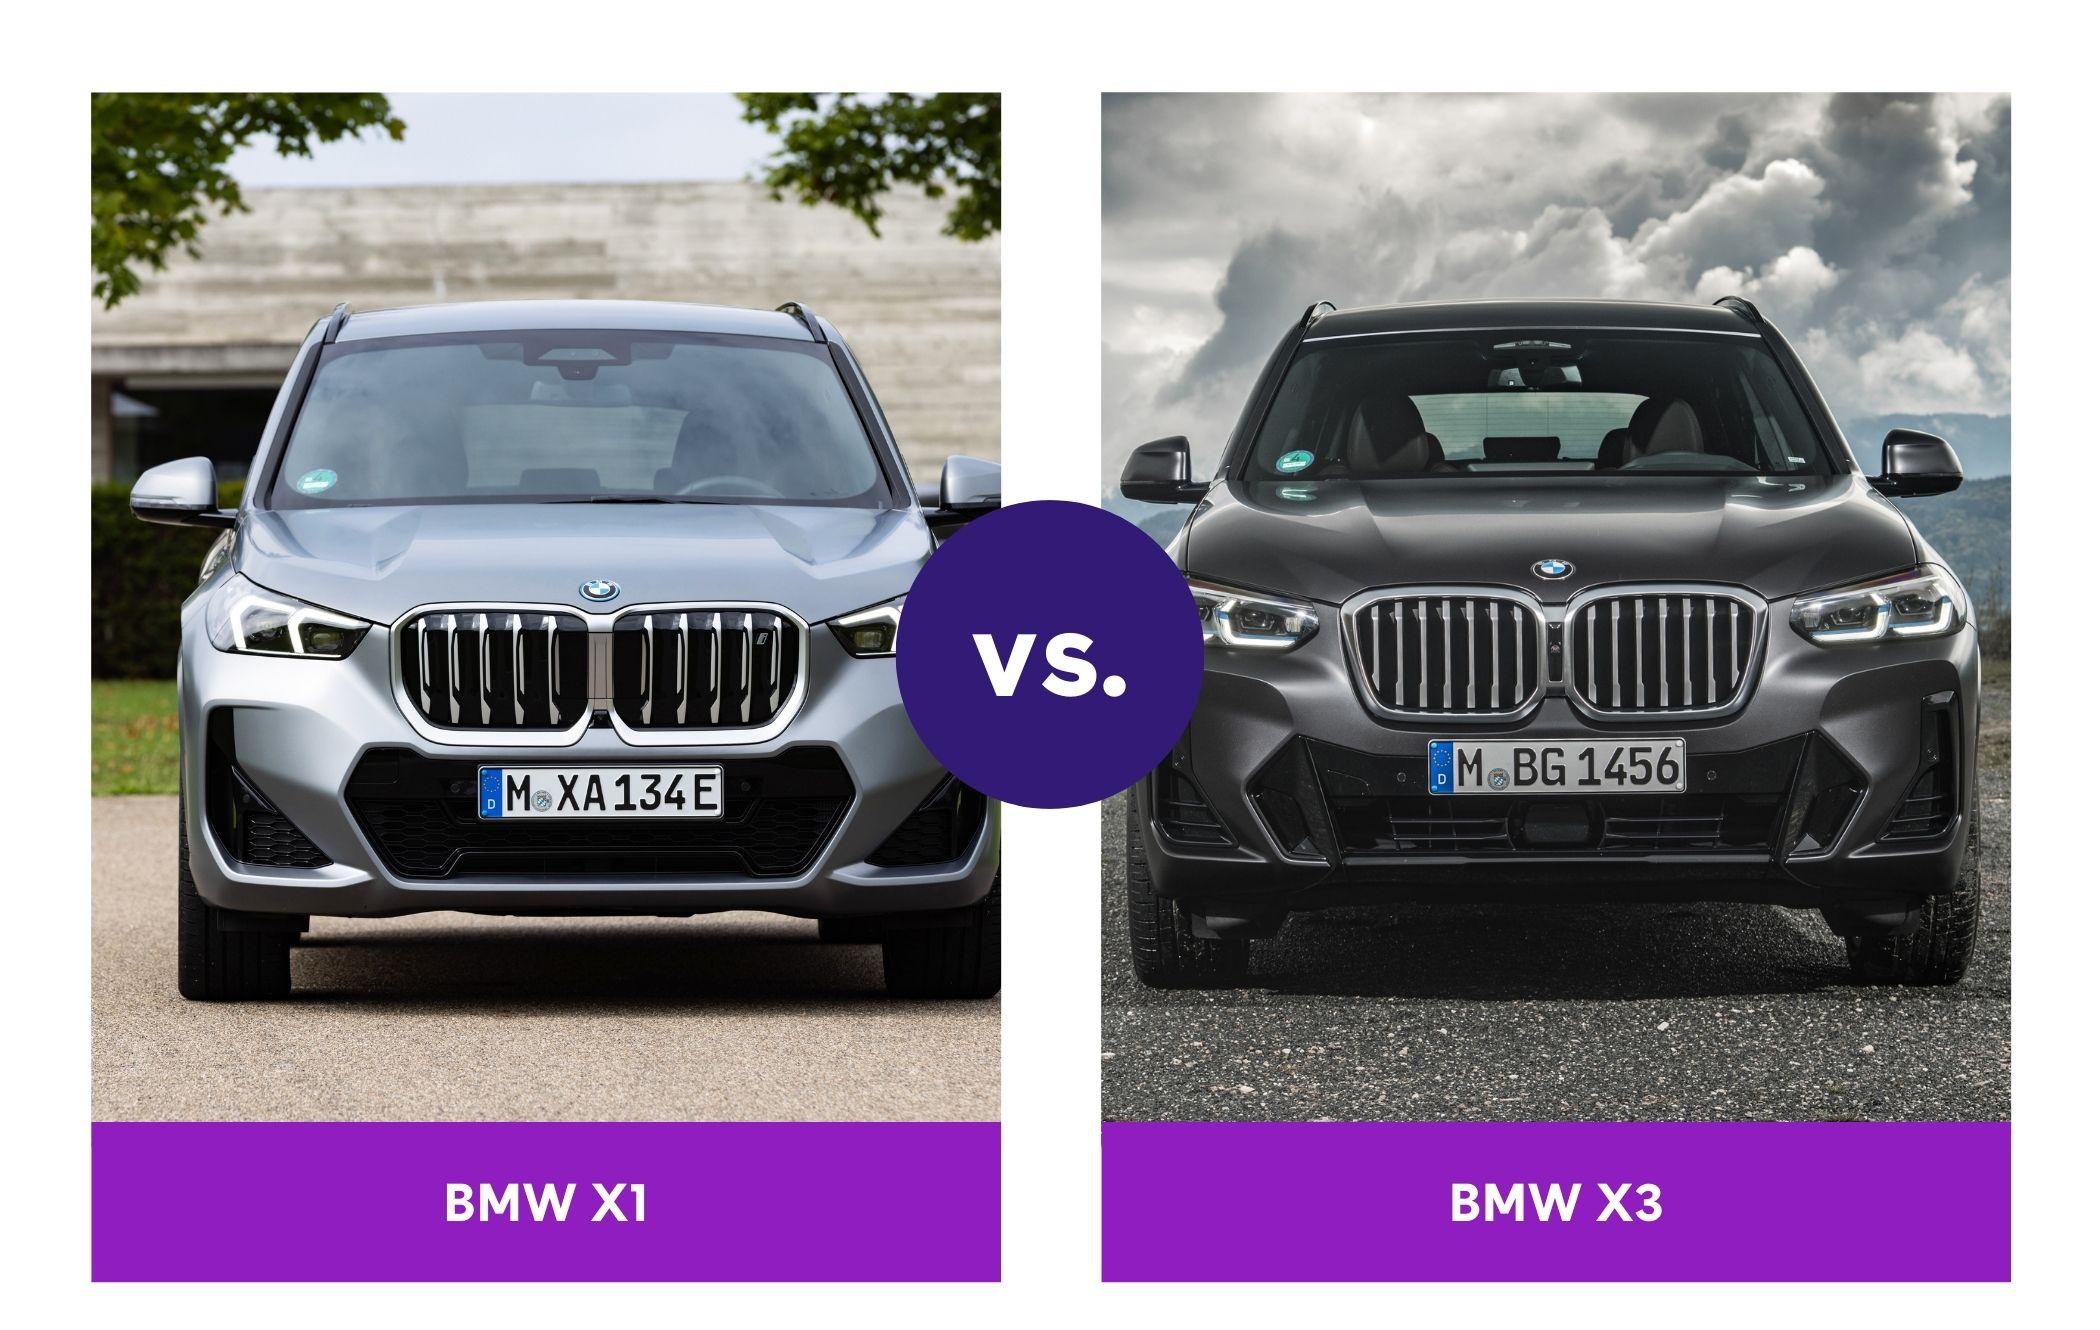 A comparison of the BMW X1 and BMW X3 models